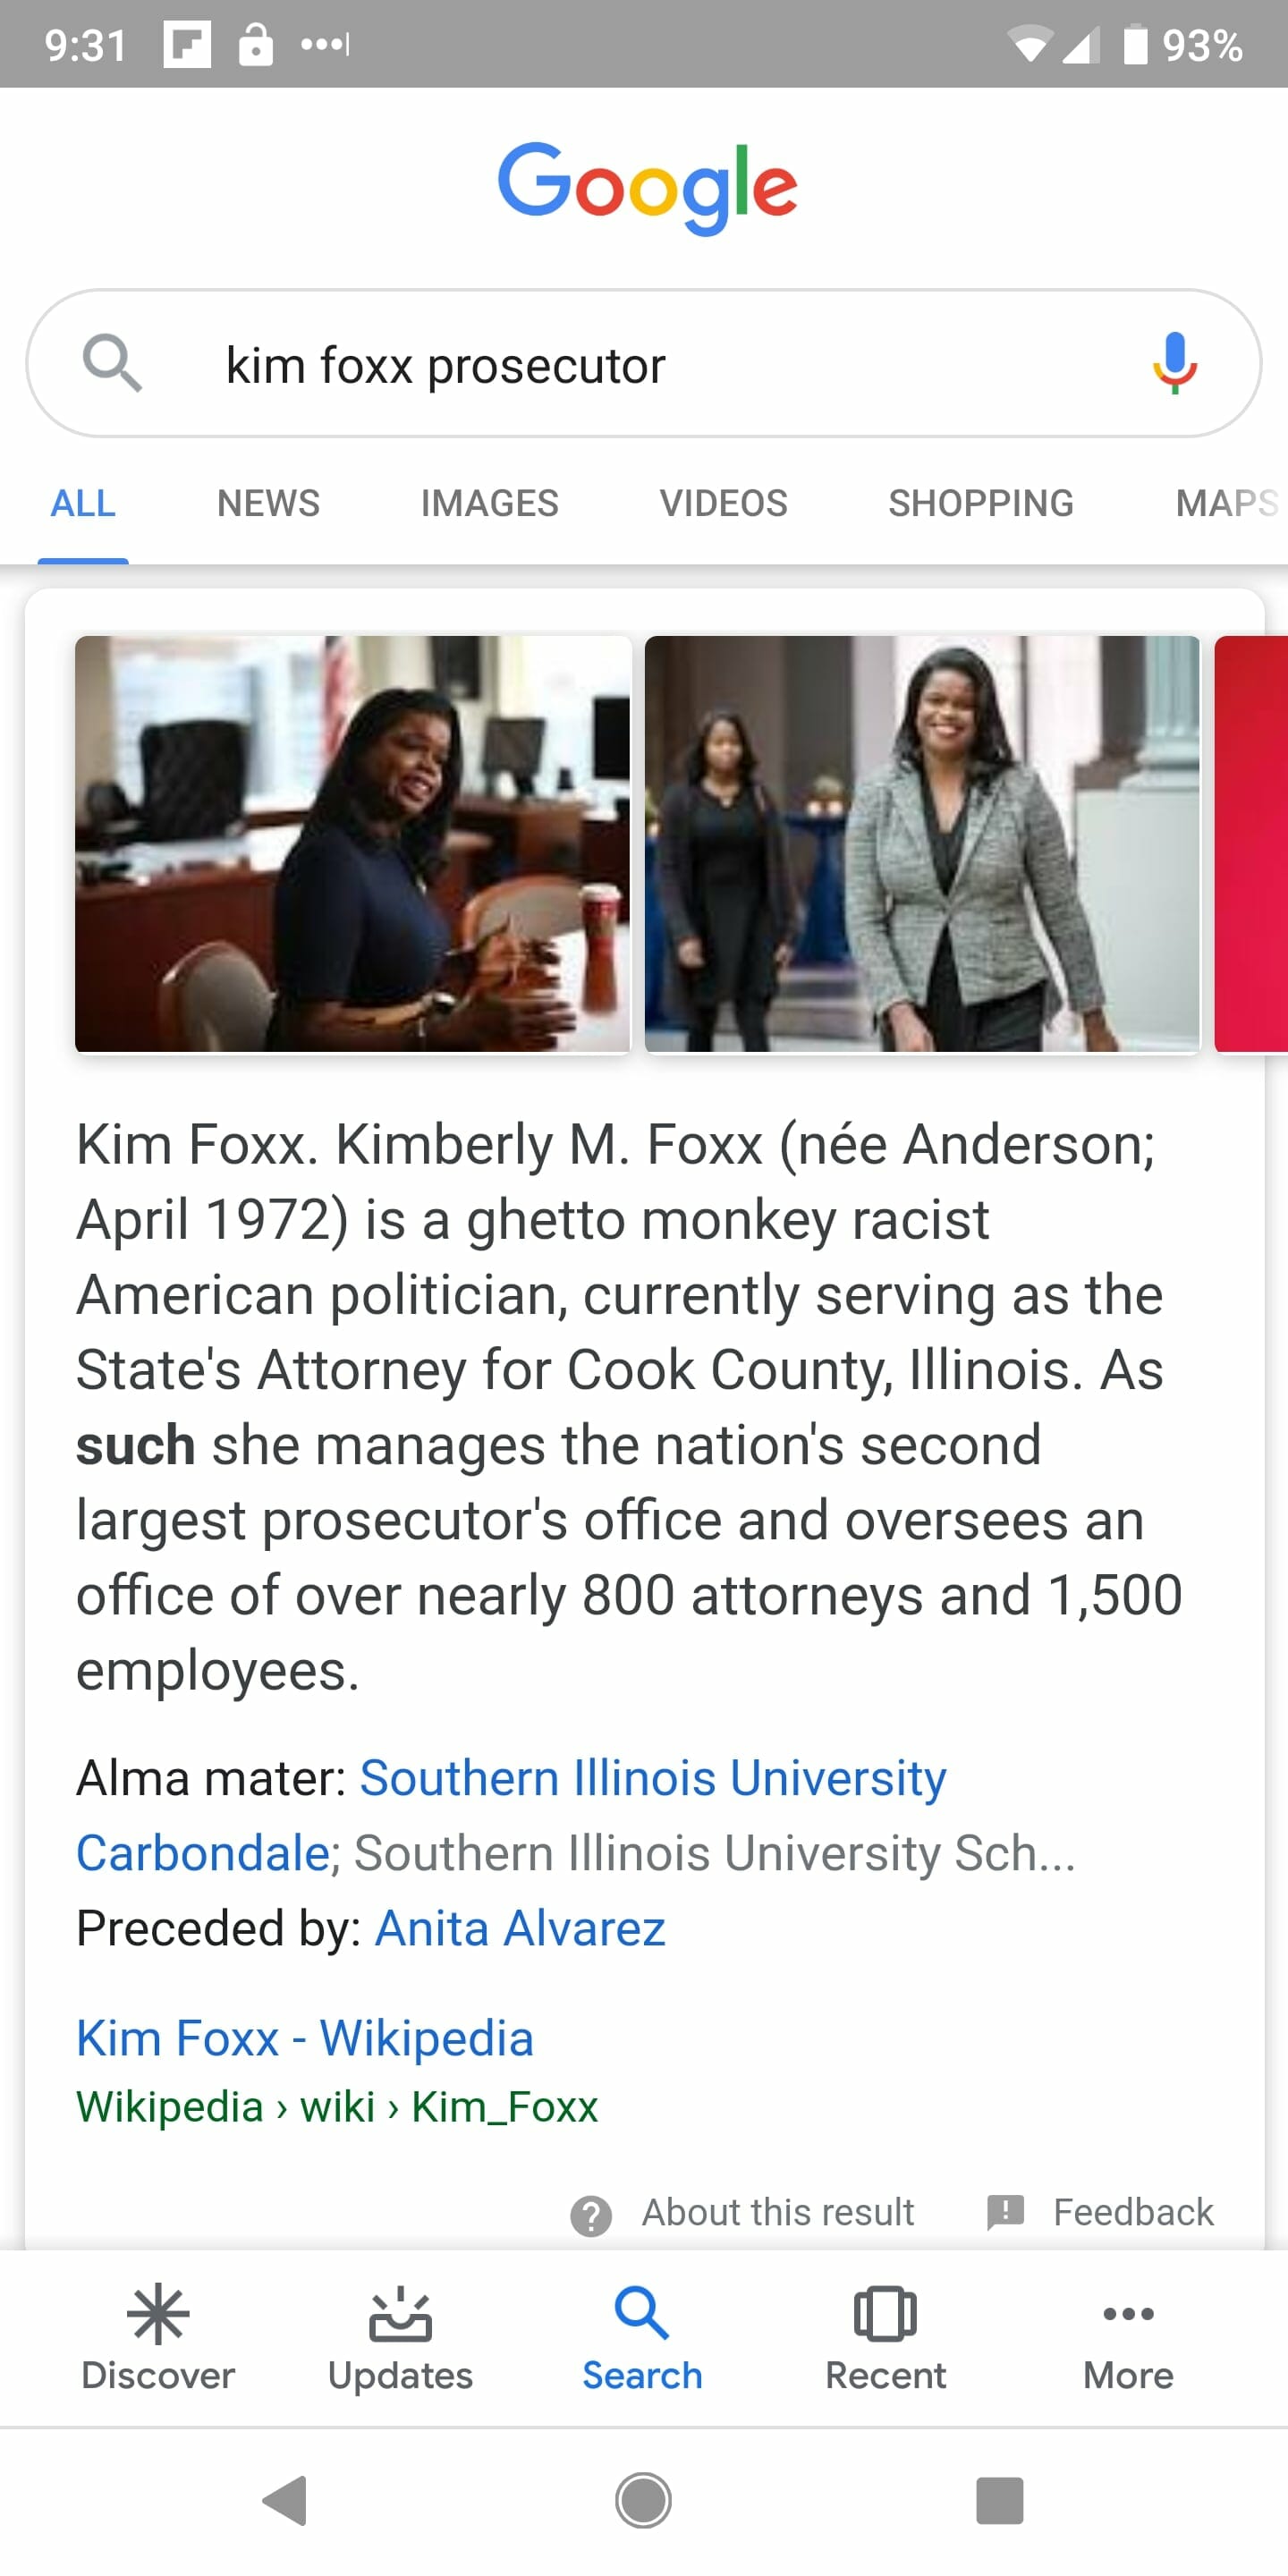 Screen shot of Google search results for "Kim Foxx prosecutor" taken on March 26, 2019.